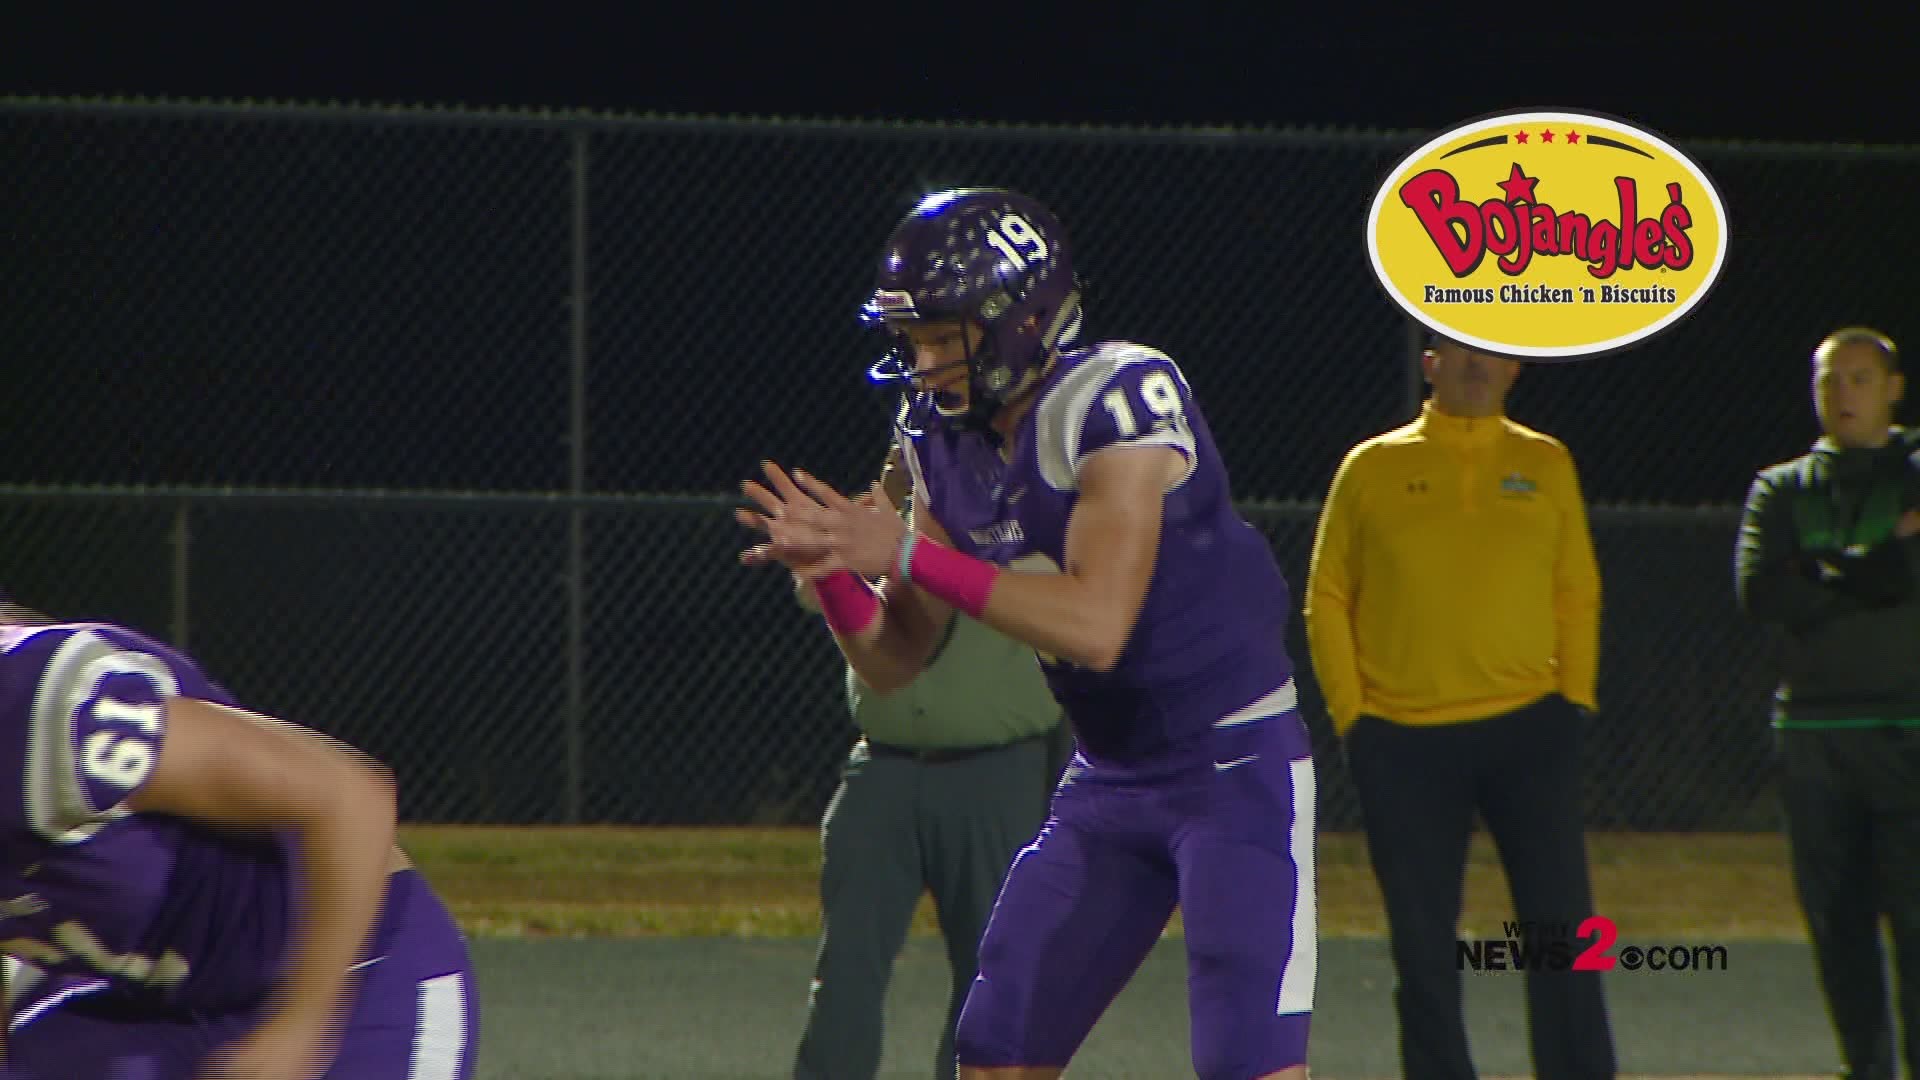 The Eagles And Nighthawks Squared Off In Our Bojangles' Game Of The Week